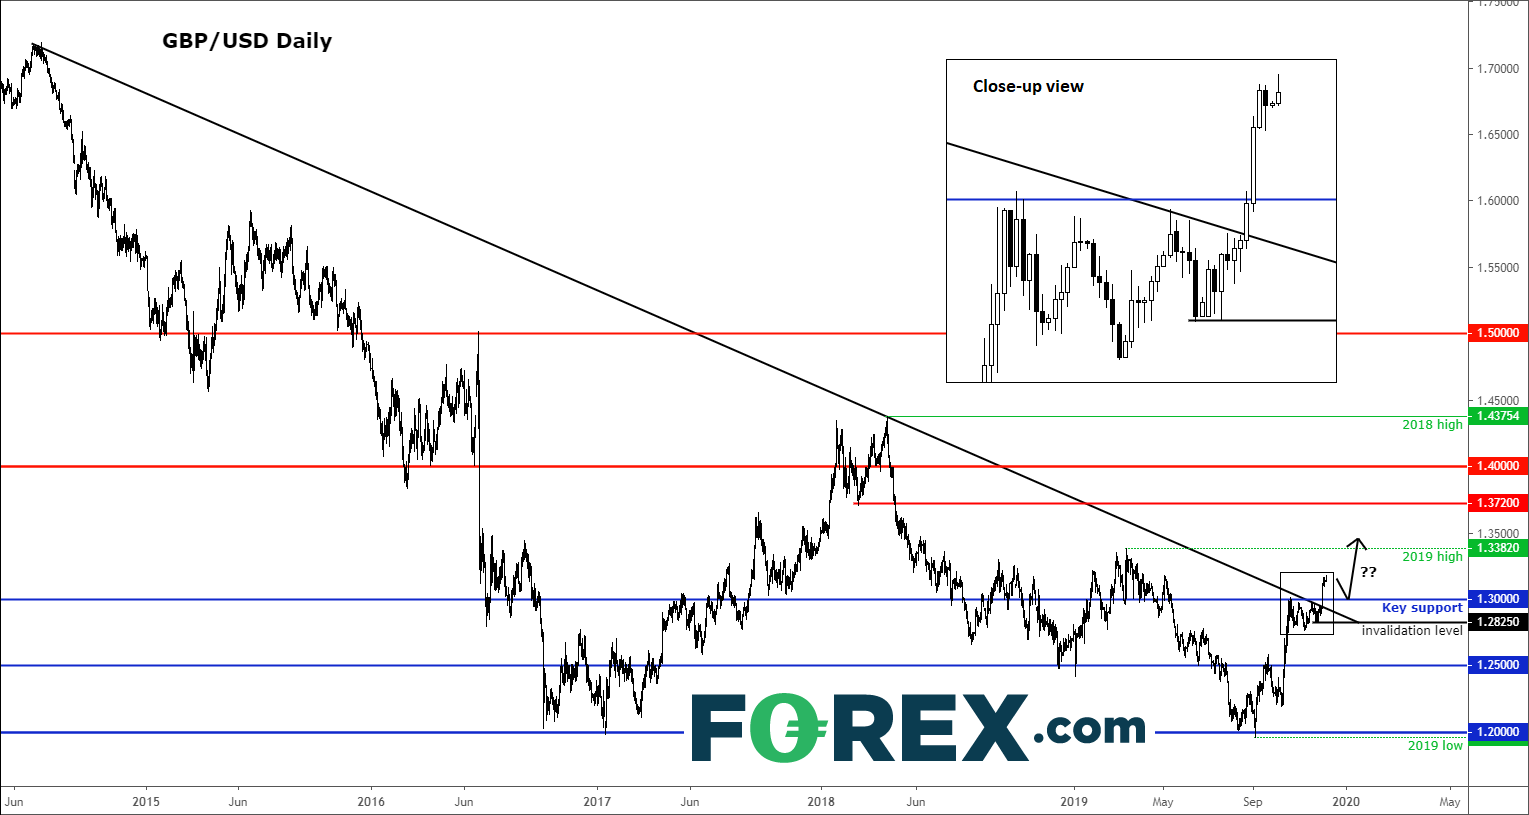 Market chart tracking GBP against USD fall ahead of UK elections. Published in Dec 2019 by FOREX.com